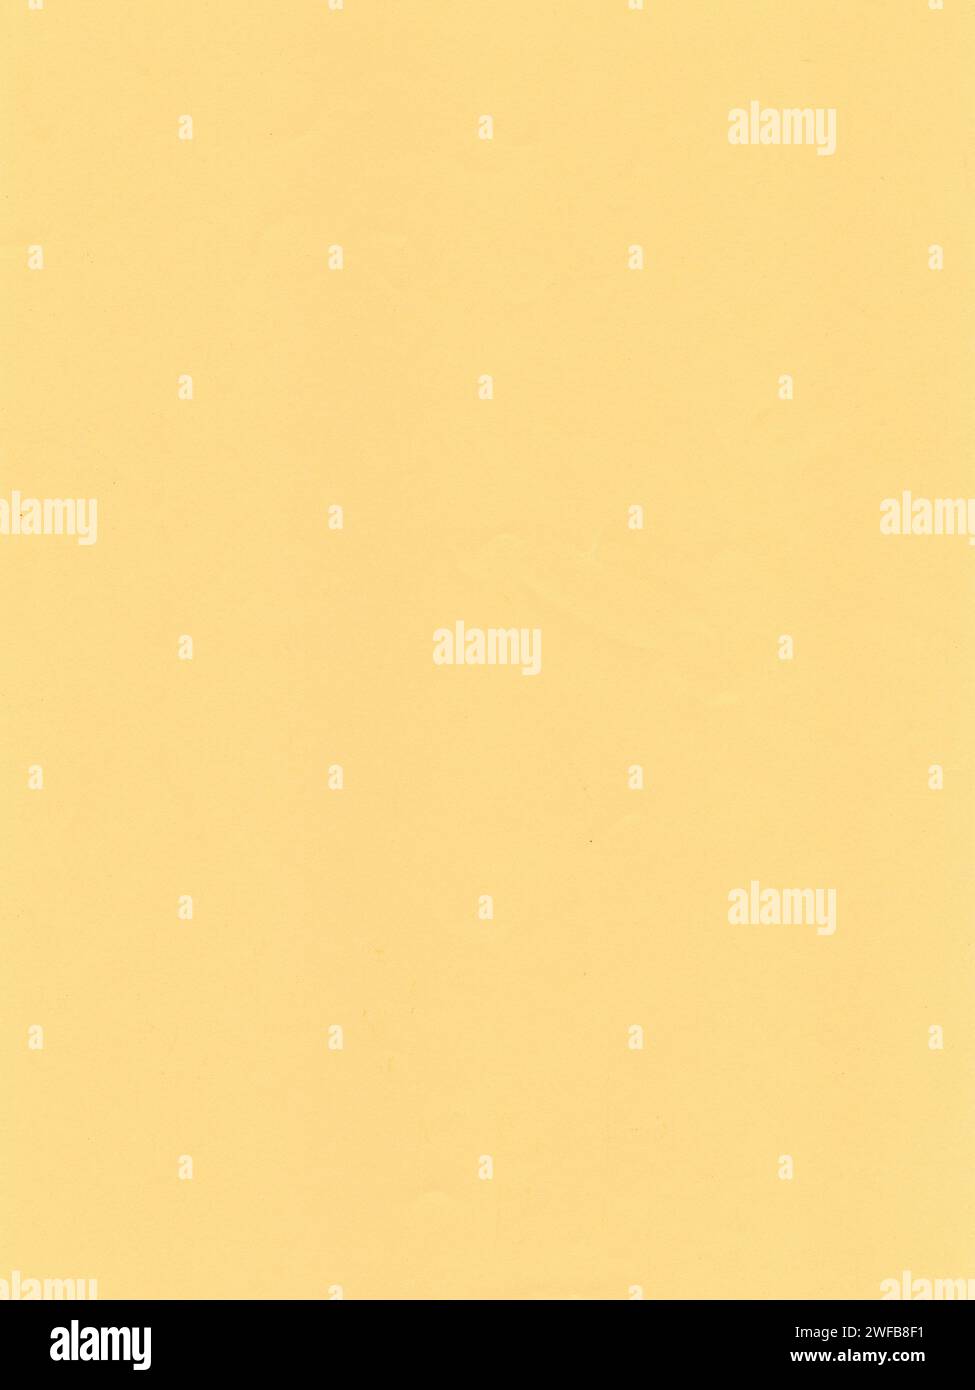 Texture of colored paper, surface of the light yellow sheet of paper Stock Photo